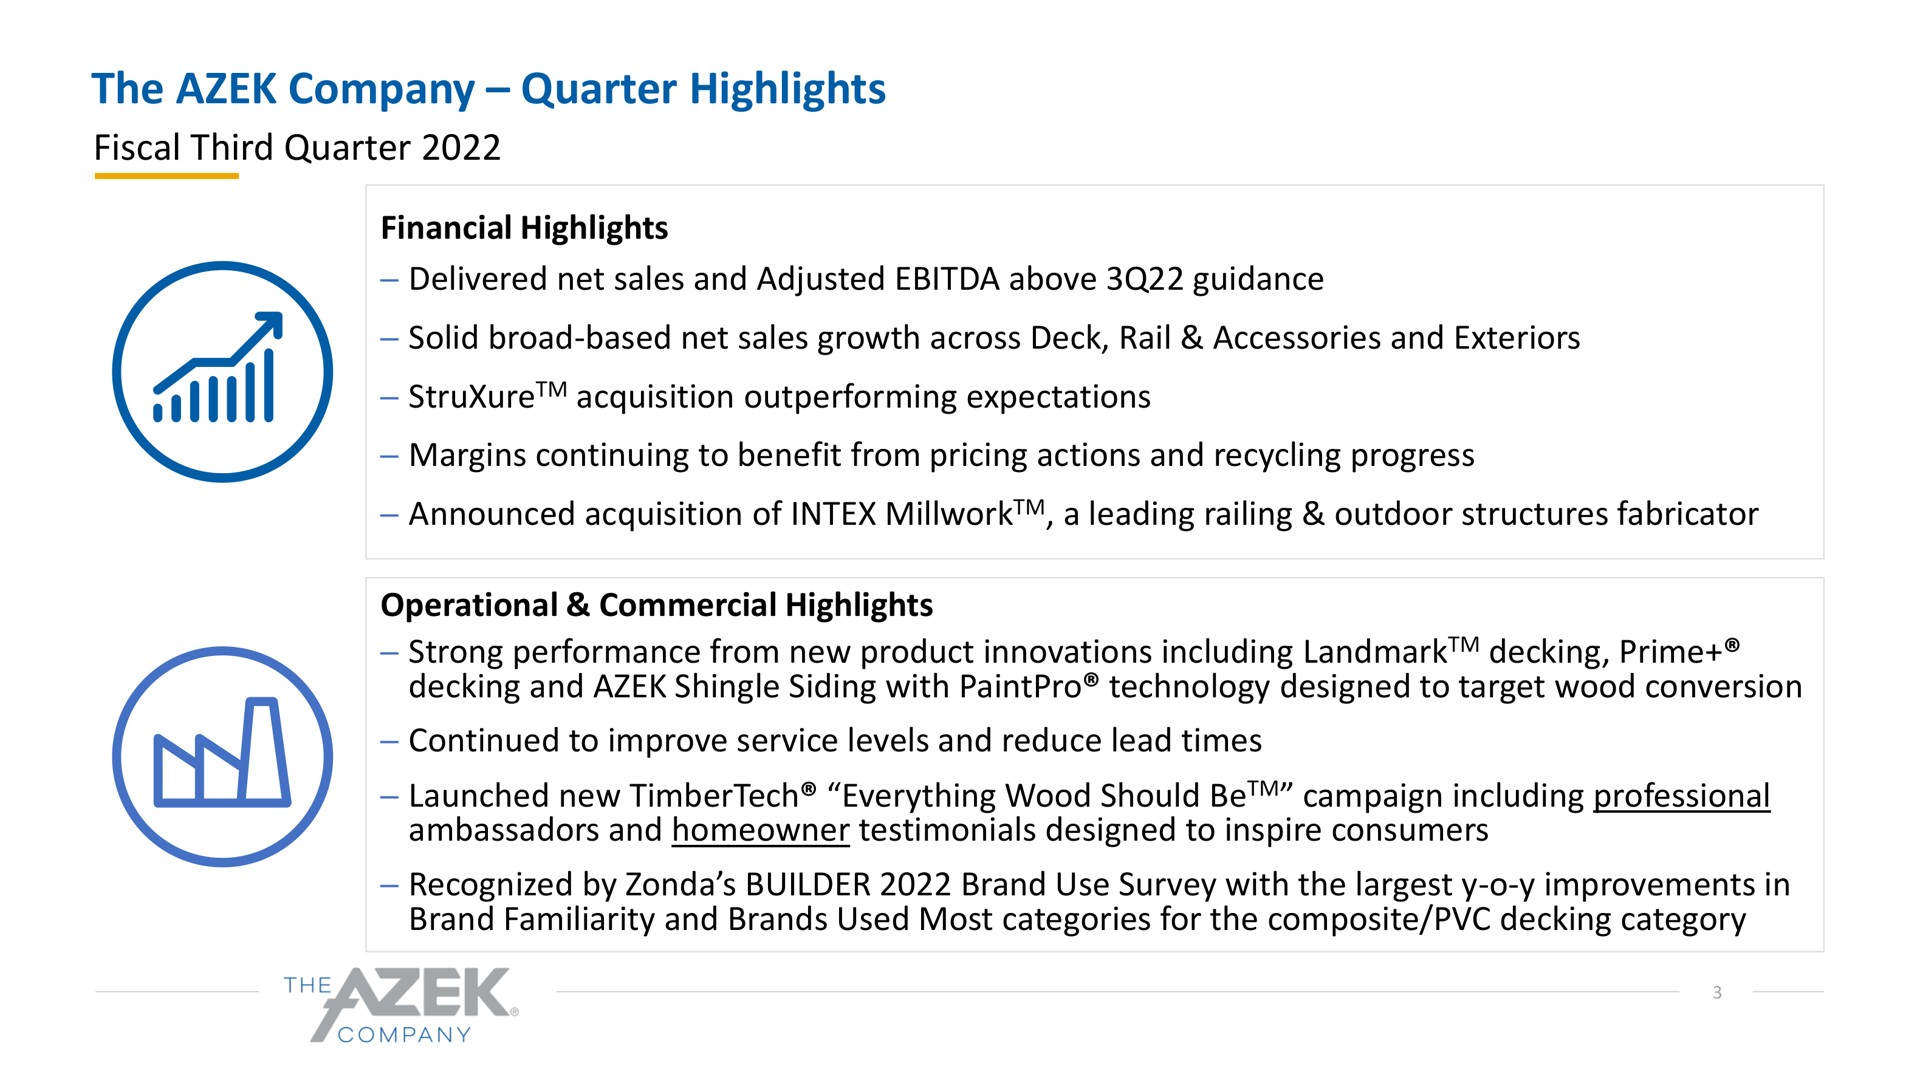 the company quarter highlights fiscal third quarter financial highlights delivered net sales and adjusted above guidance solid broad based net sales growth across deck rail accessories and exteriors acquisition outperforming expectations margins continuing to benefit from pricing actions and recycling progress announced acquisition of a leading railing outdoor structures fabricator operational commercial highlights strong performance from new product innovations including decking prime decking and shingle siding with technology designed to target wood conversion continued to improve service levels and reduce lead times launched new everything wood should campaign including professional ambassadors and homeowner testimonials designed to inspire consumers recognized by builder brand use survey with the improvements in brand familiarity and brands used most categories for the composite decking category | Azek